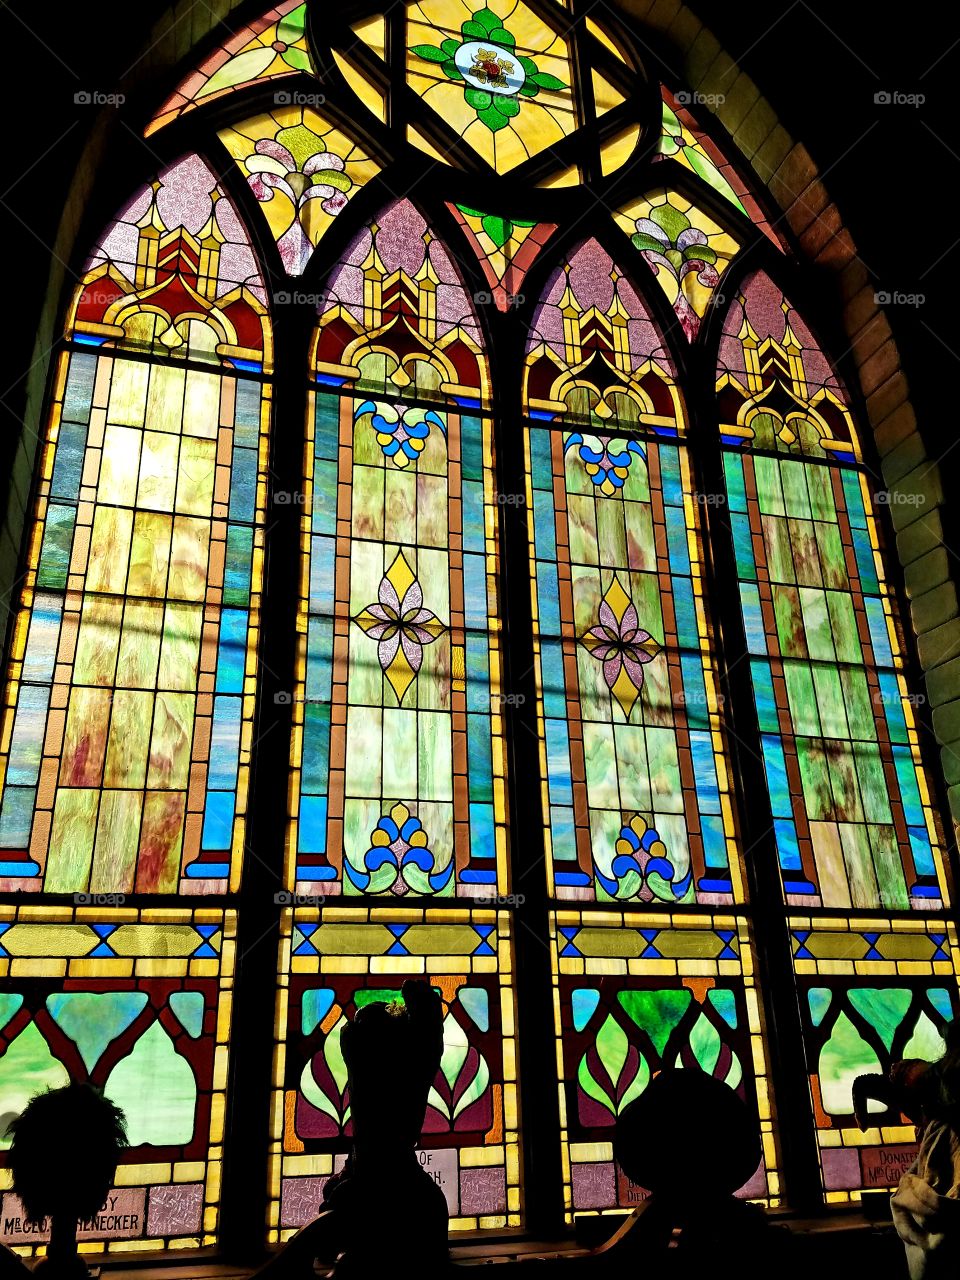 Marvelous stained glass window